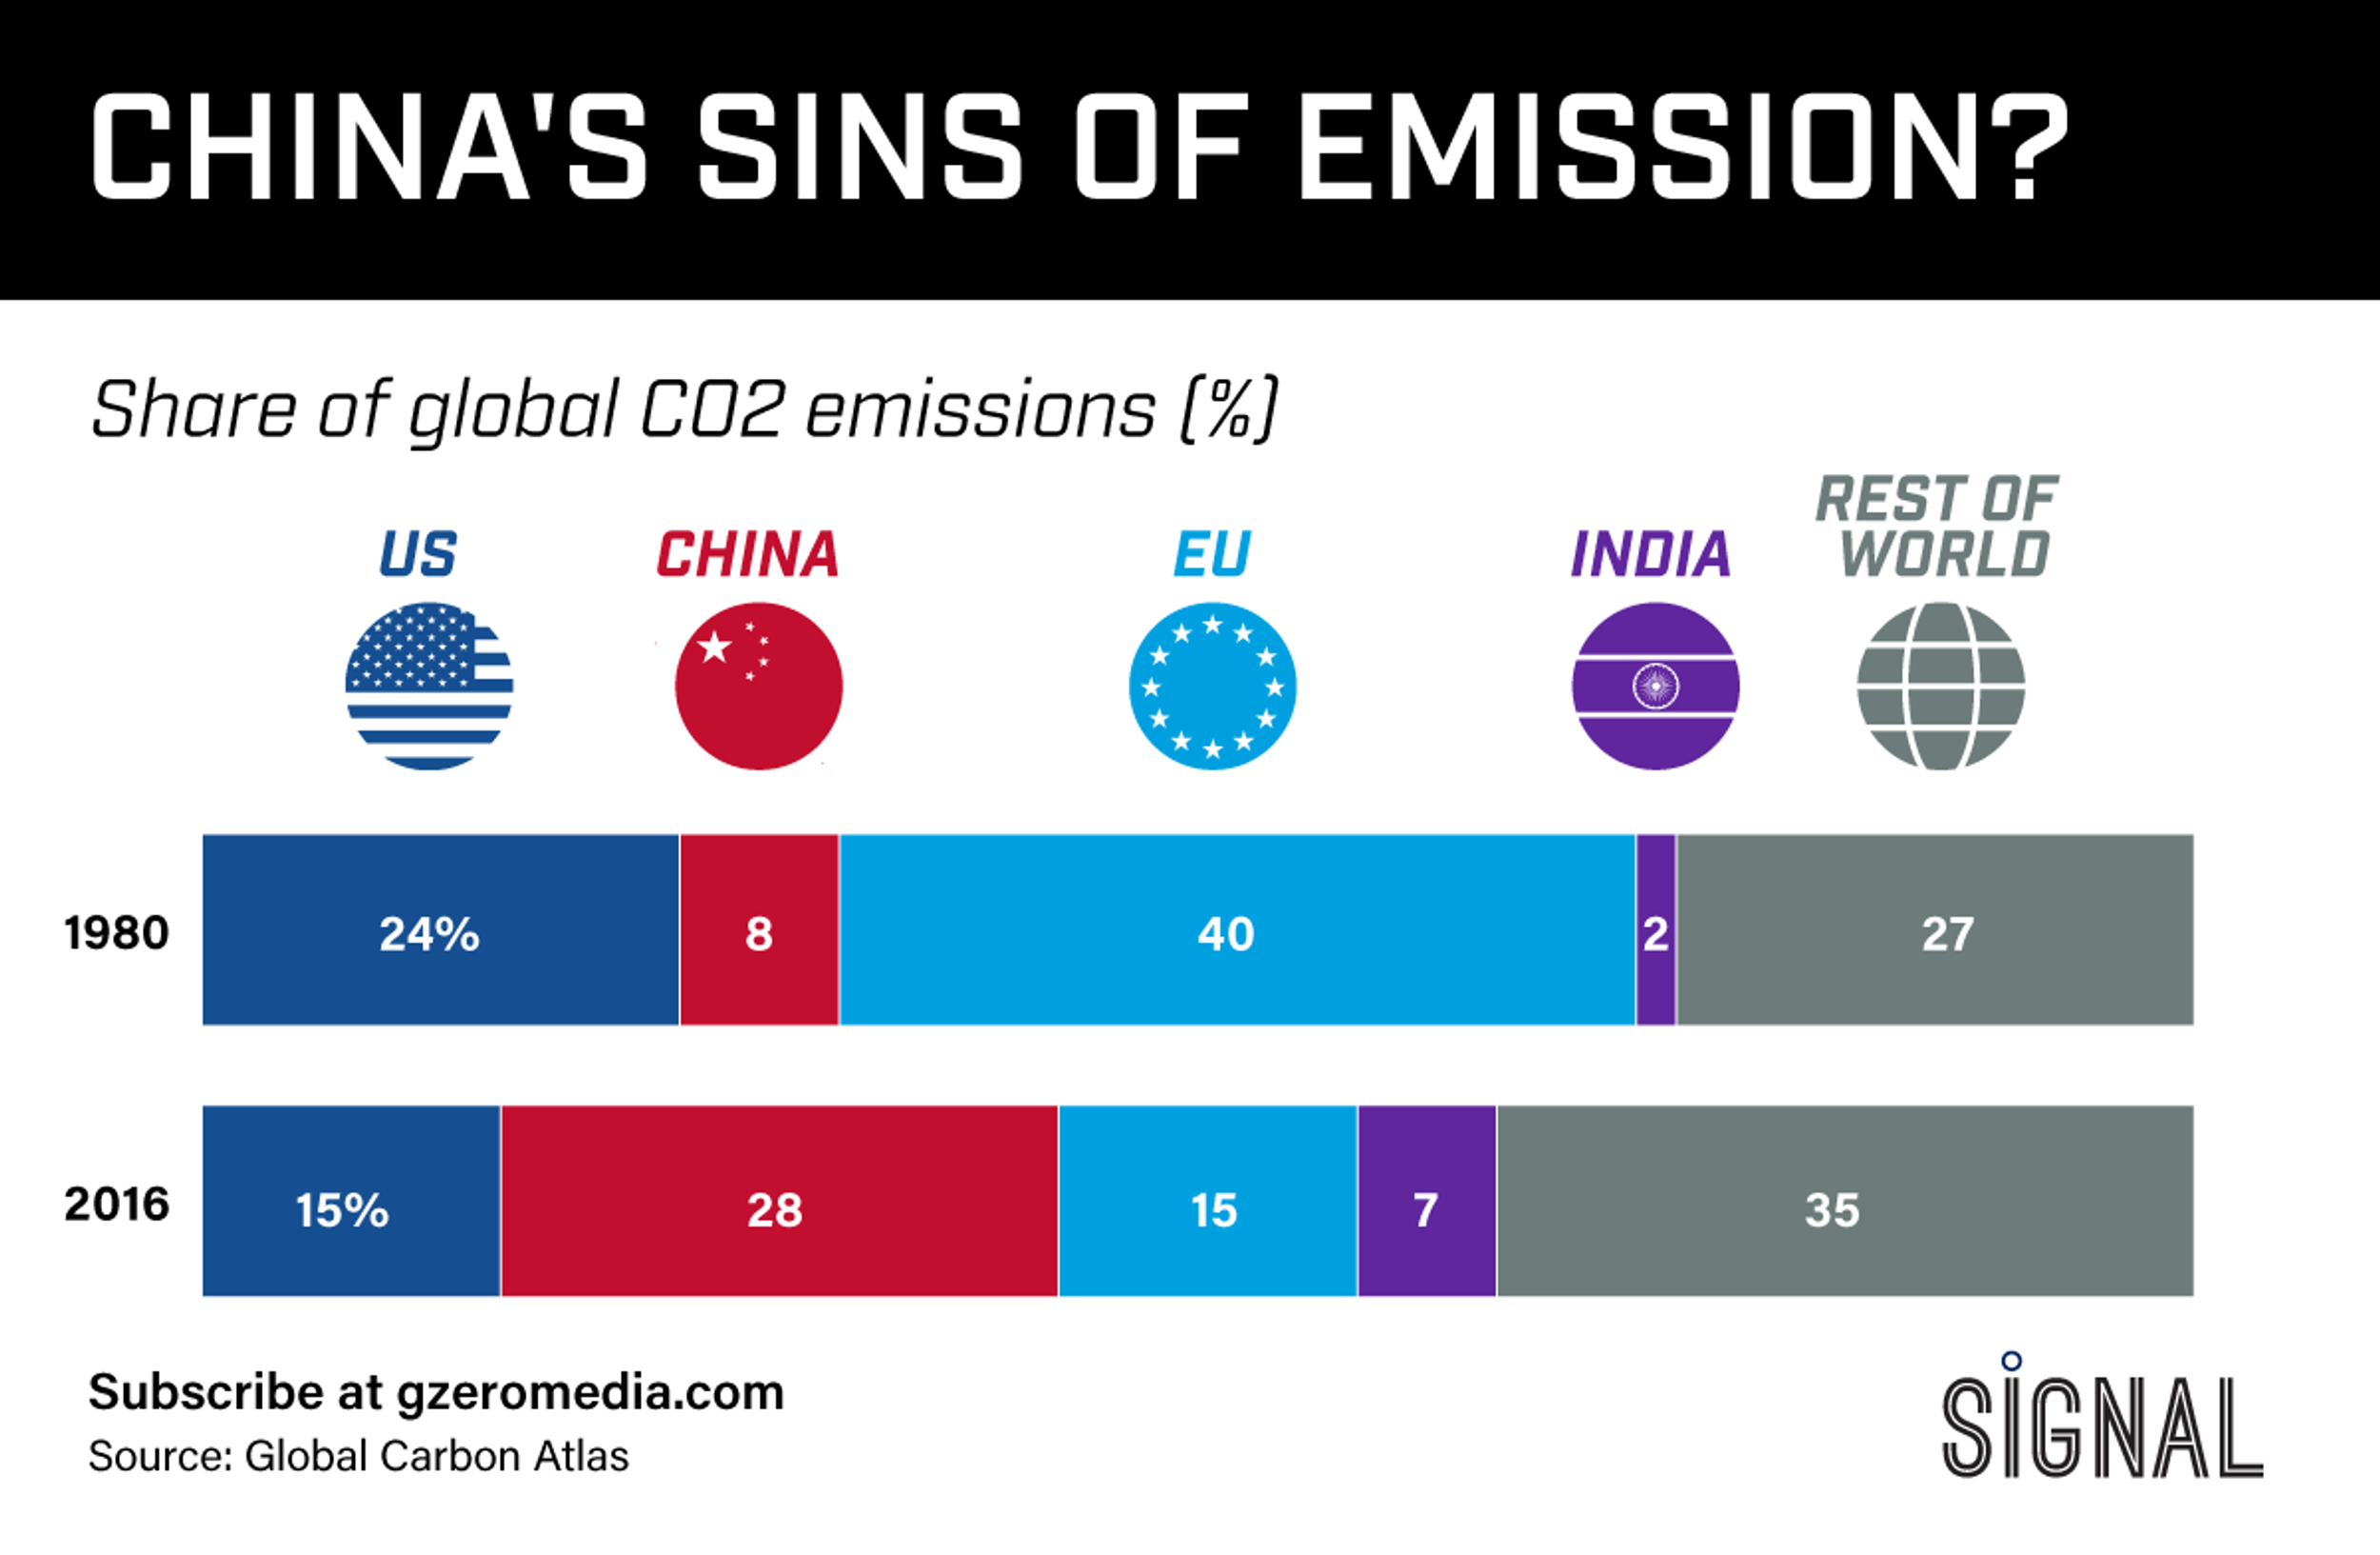 THE GRAPHIC TRUTH: CHINA’S SINS OF EMISSION?